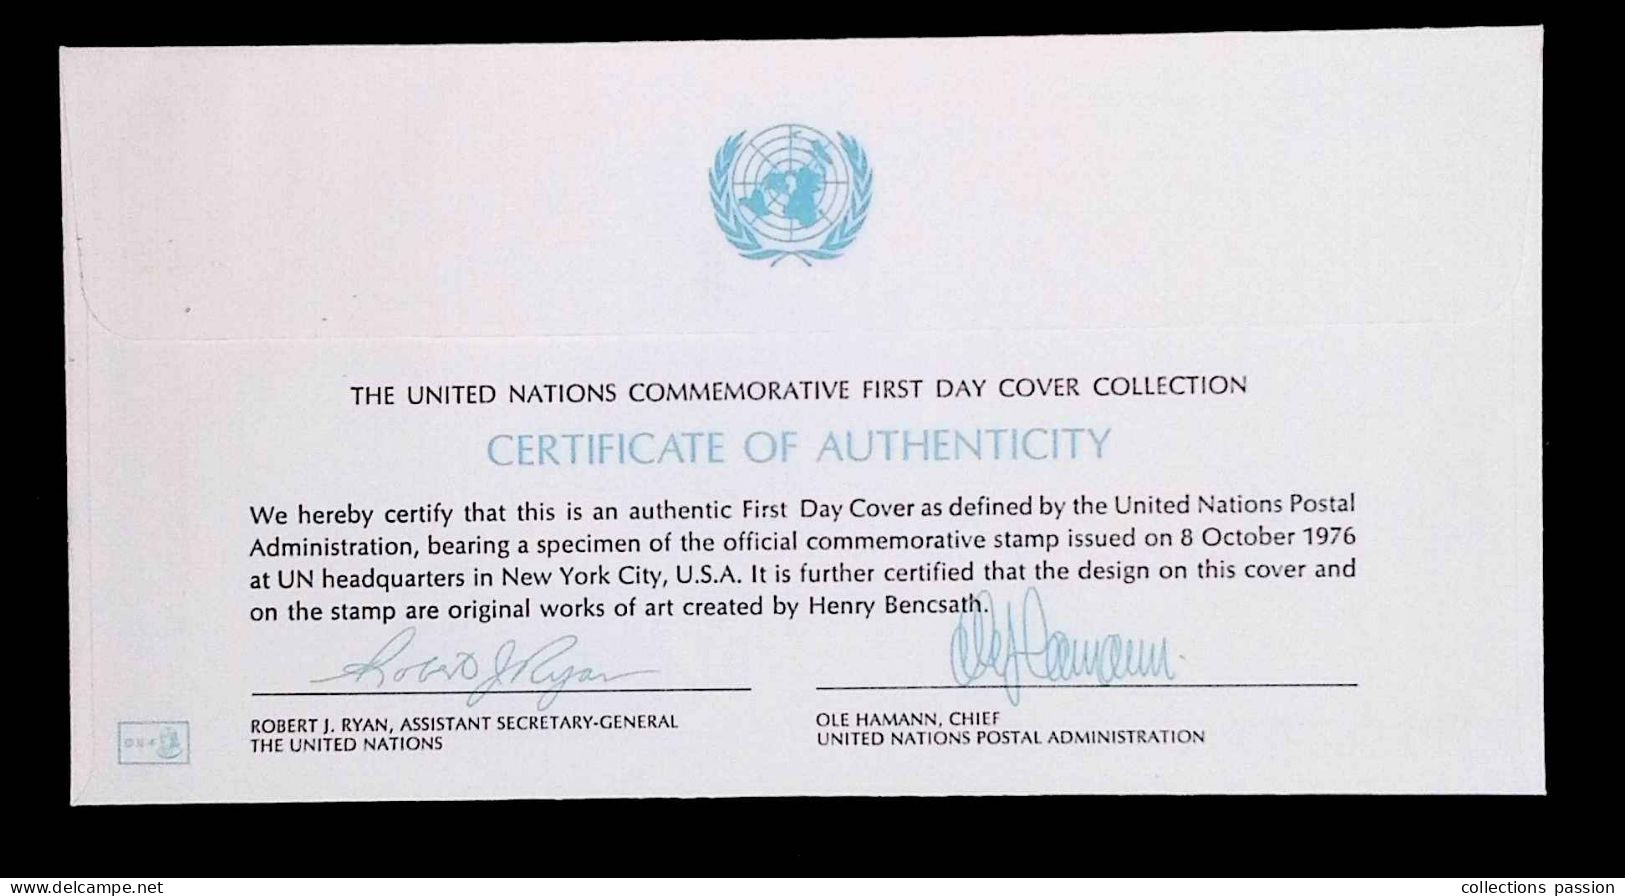 CL, FDC, 1 Er Jour, United Nations, New York, Oct. 8 1976, 25 Th Anniversary U.N. Postal Administration, 2 Scans - Covers & Documents